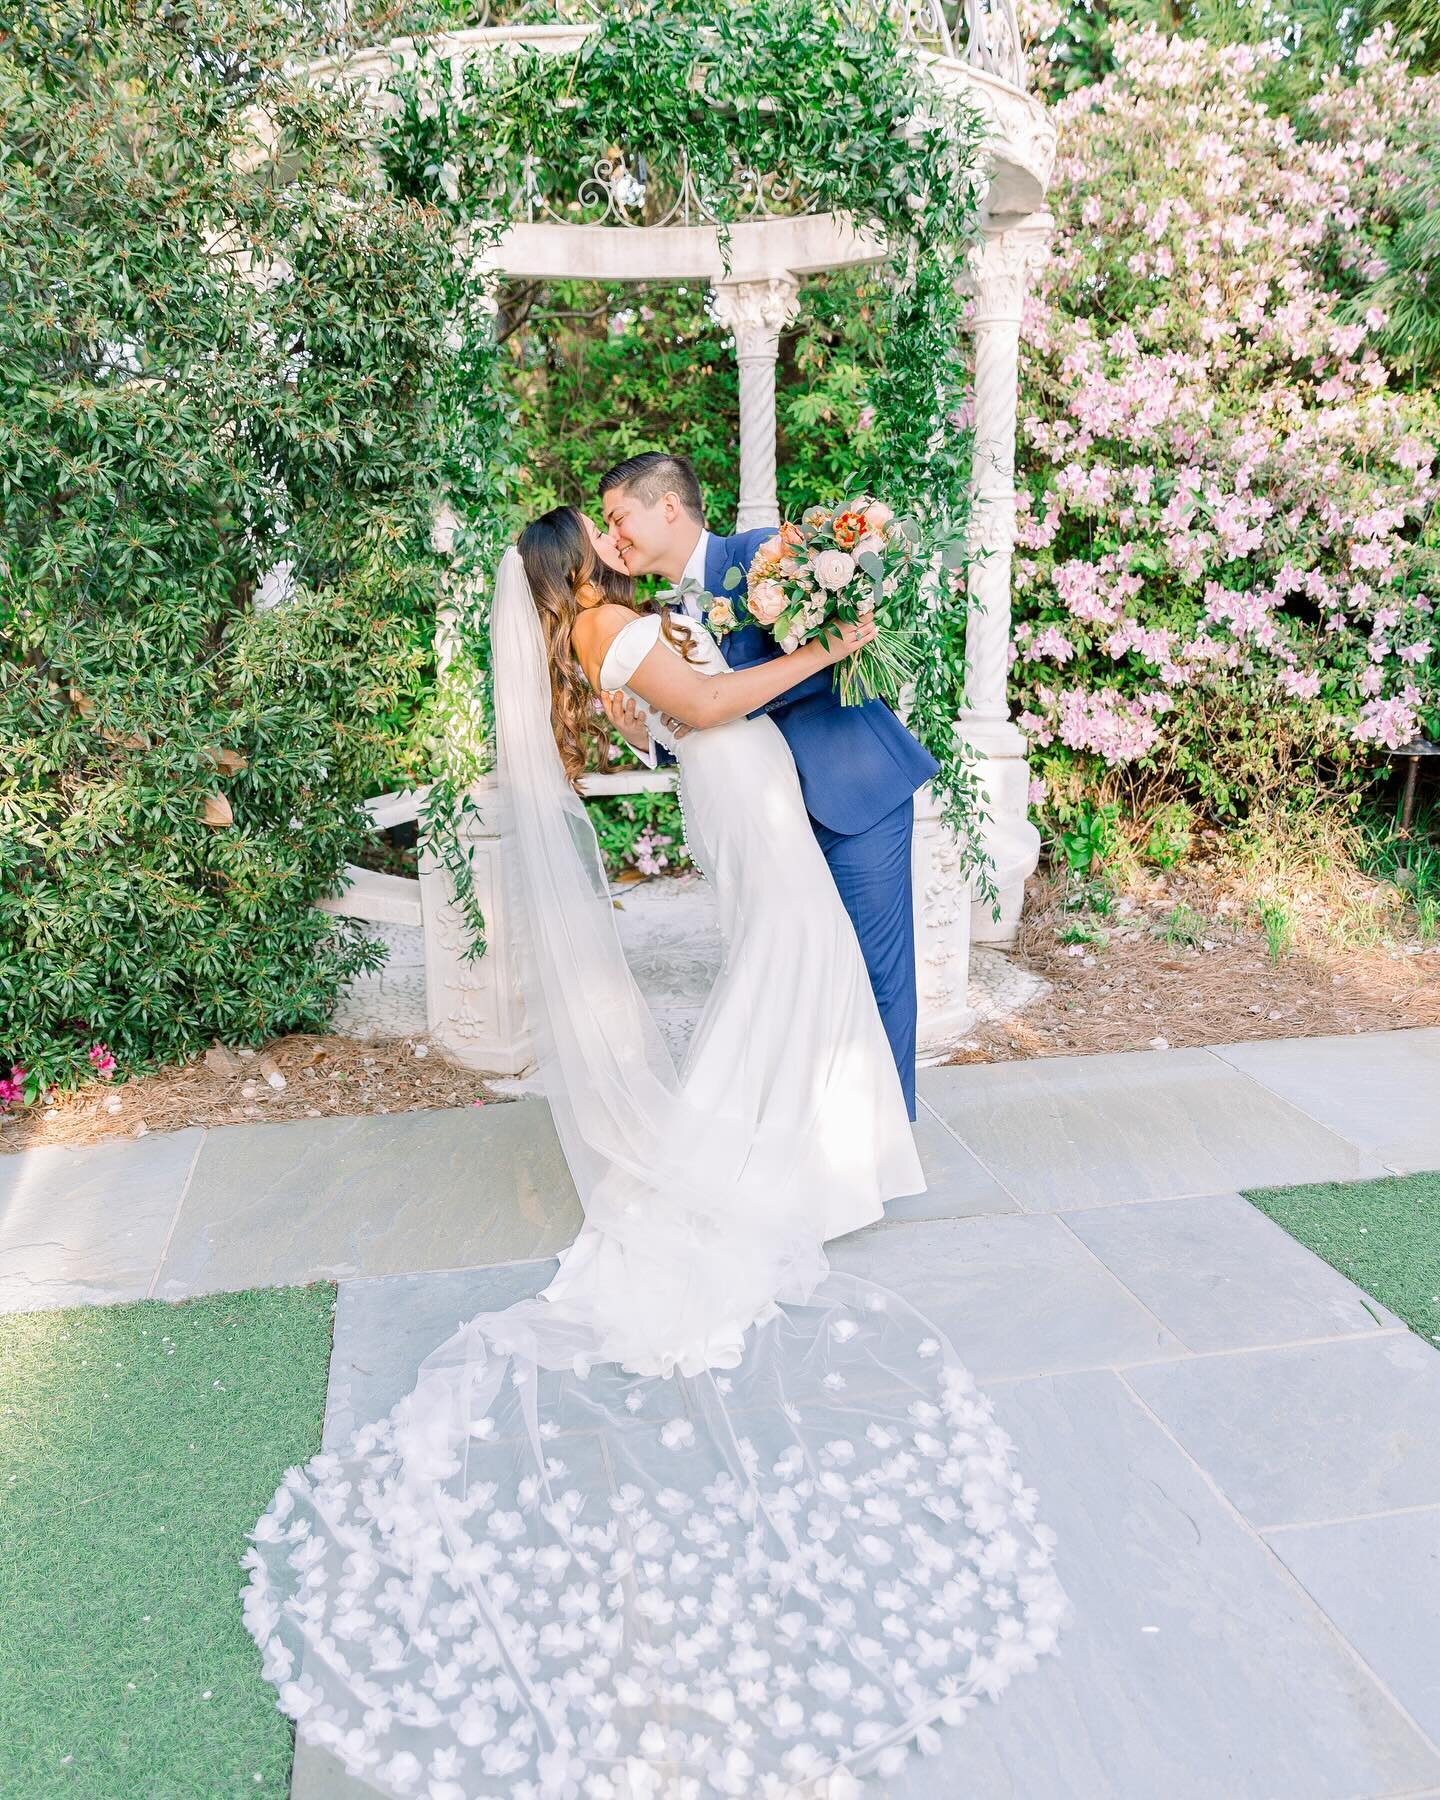 Spring weddings activated 🌸 
The Atrium is, without a doubt, where you want to tie the knot in spring. Click the link in our bio to schedule your tour and snag one of the last remaining April-May 2025 prime dates!

Photo: @heatherdettorephotography 